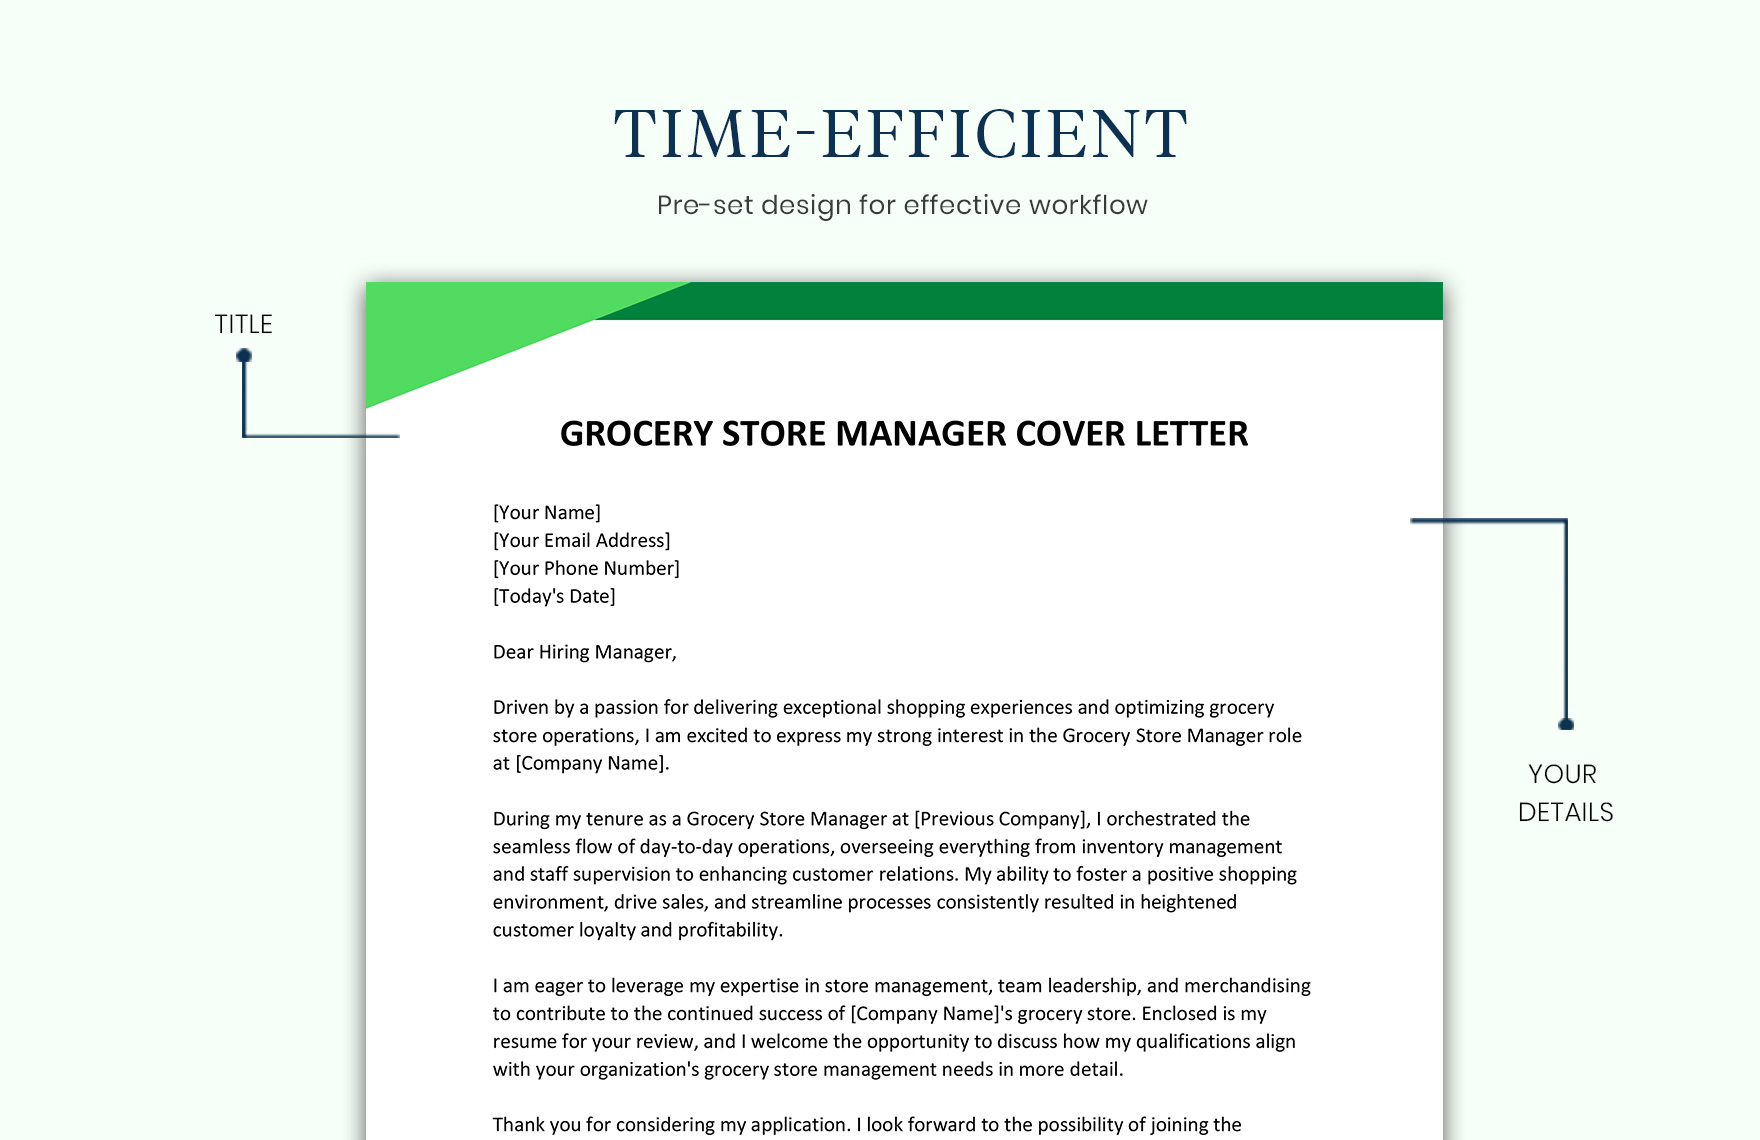 Grocery Store Manager Cover Letter